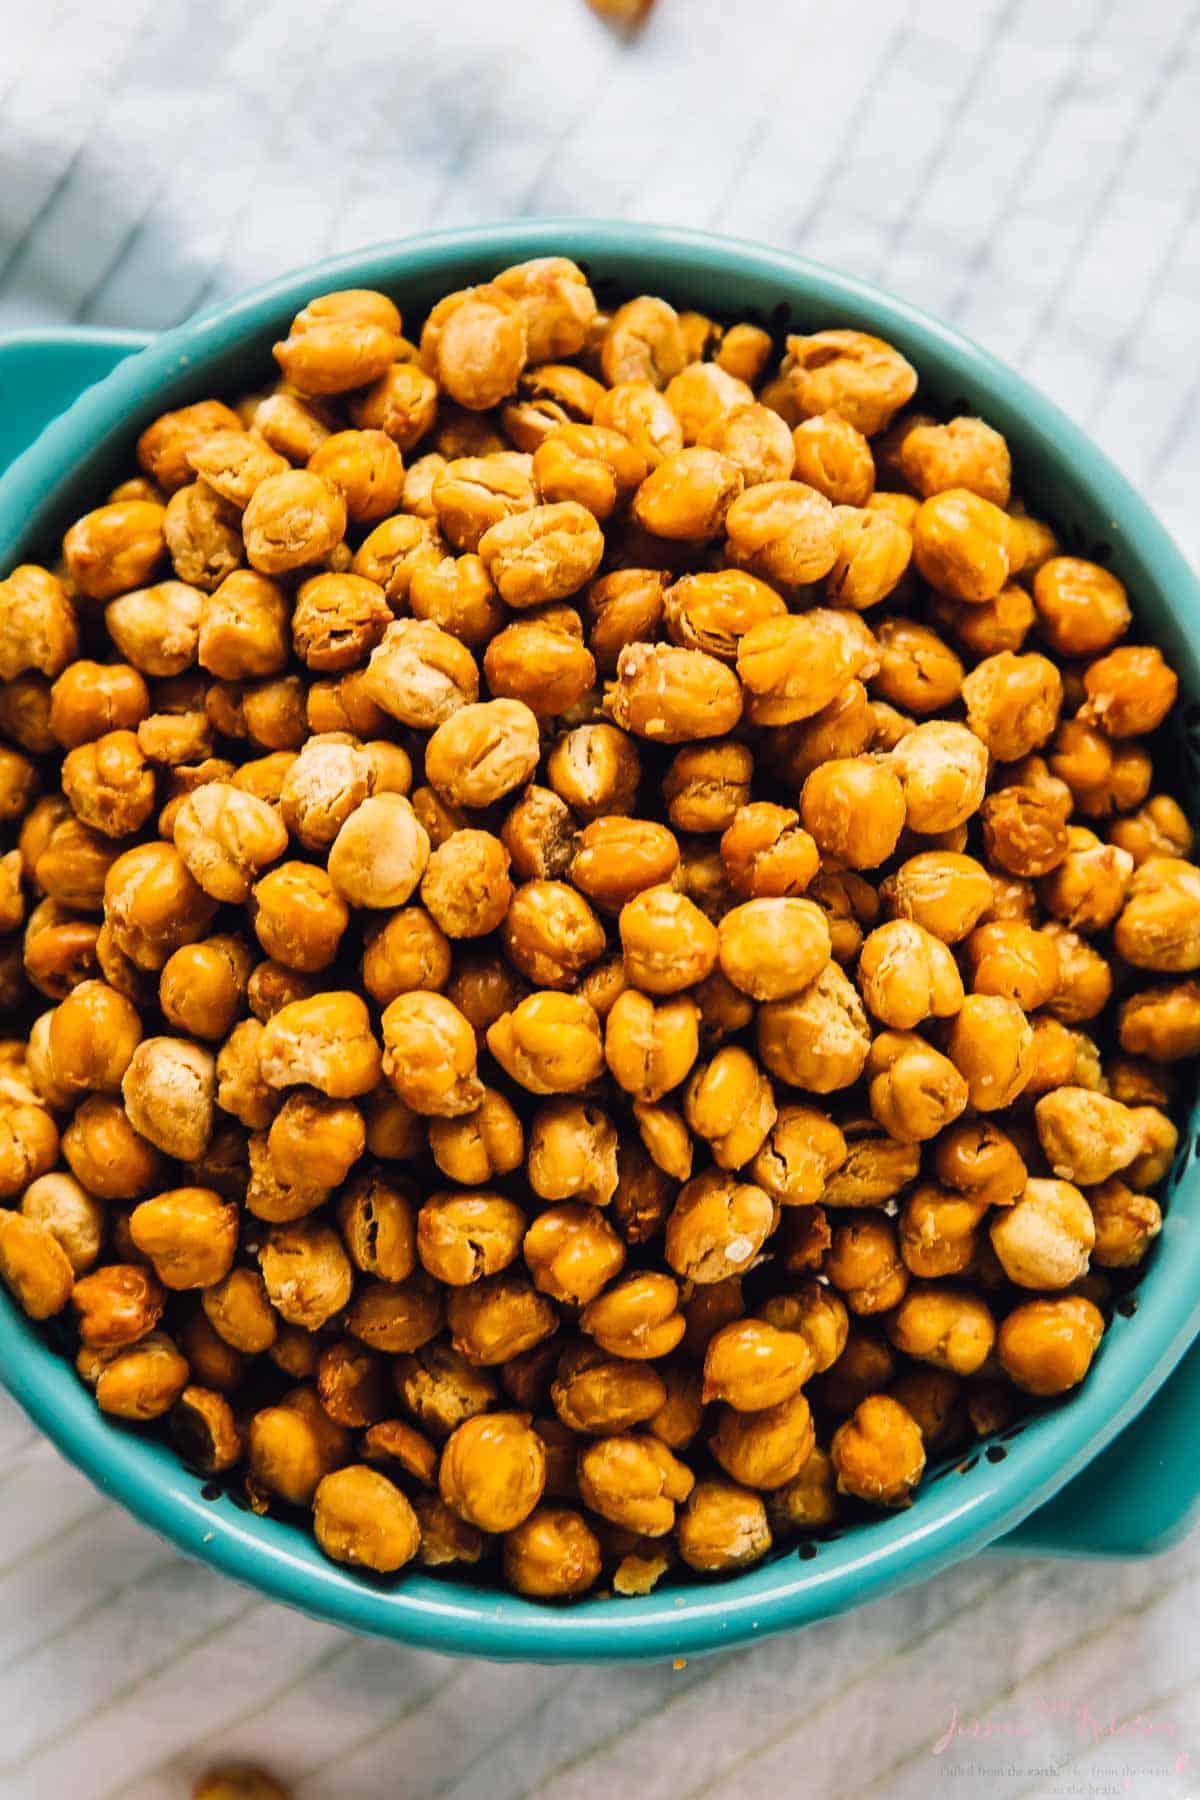 Large bowl of roasted chickpeas